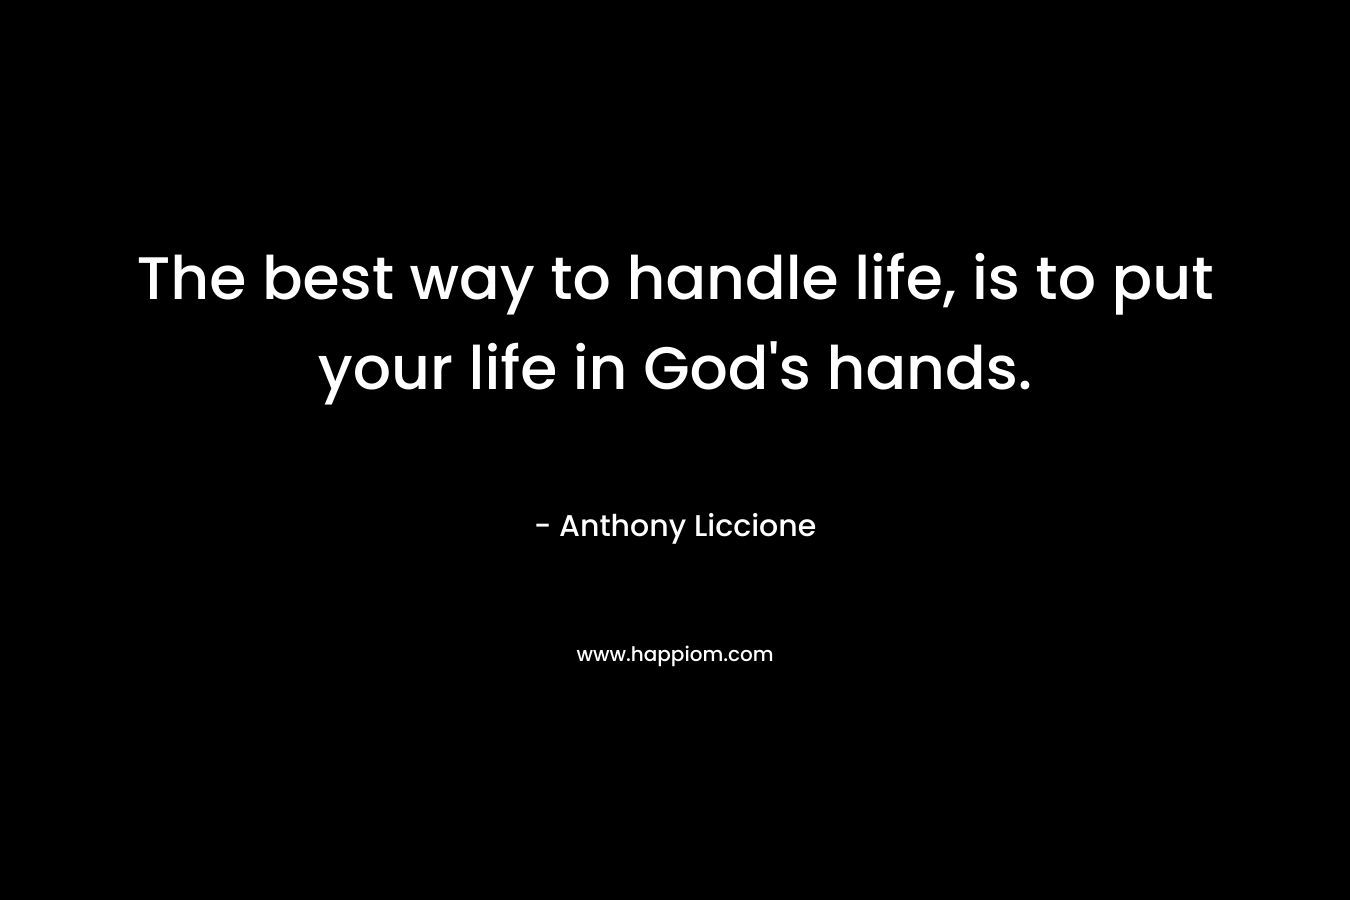 The best way to handle life, is to put your life in God's hands.